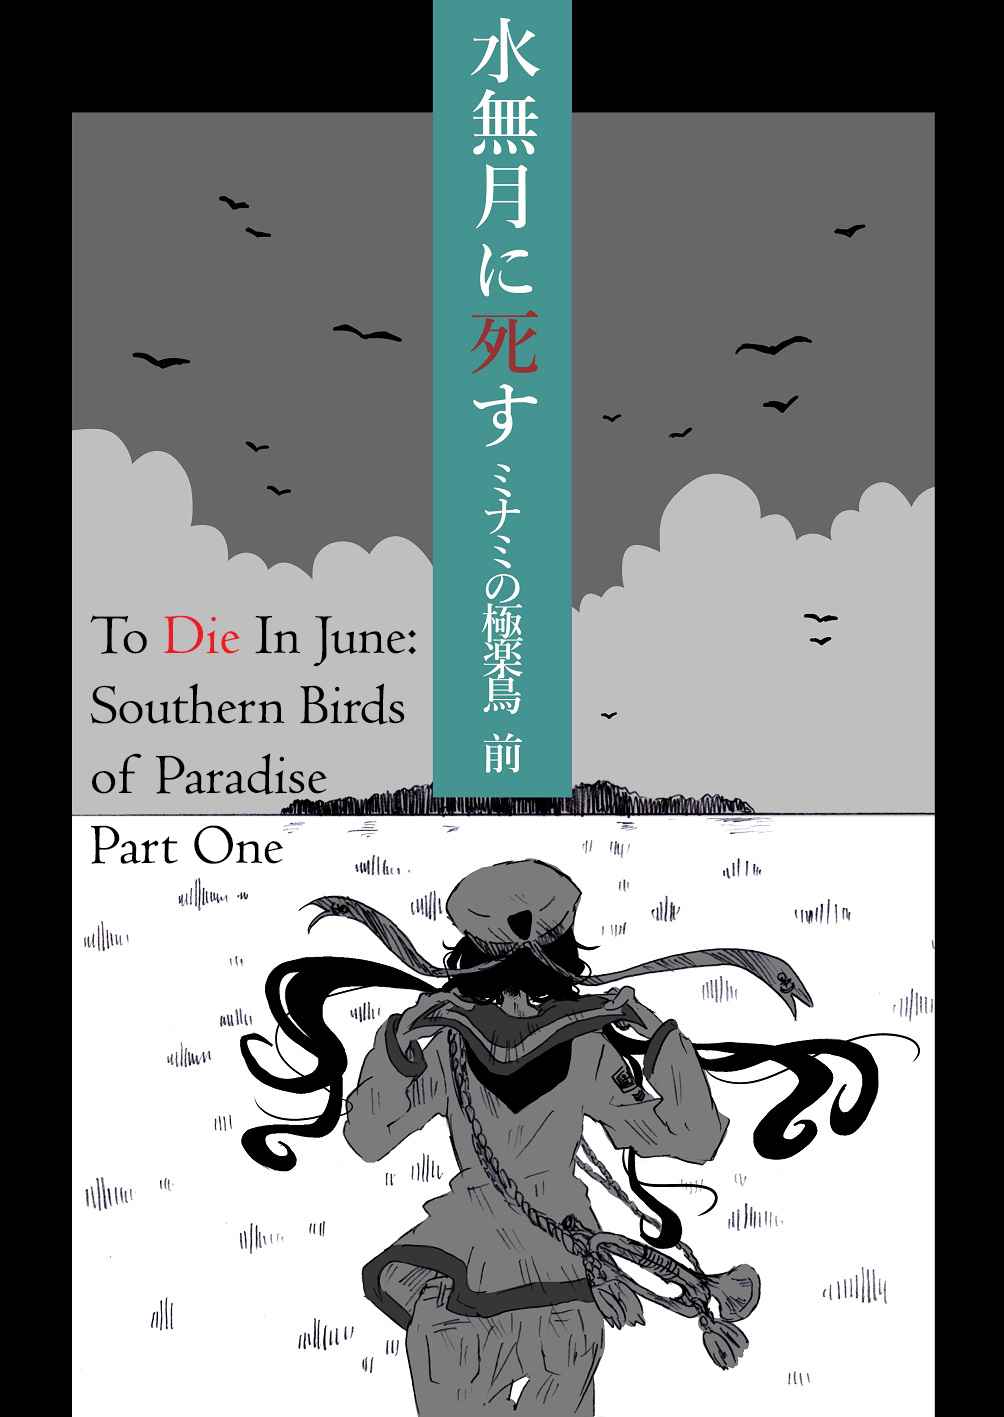 To Die In June Ch. 6 Southern Birds of Paradise, Part One